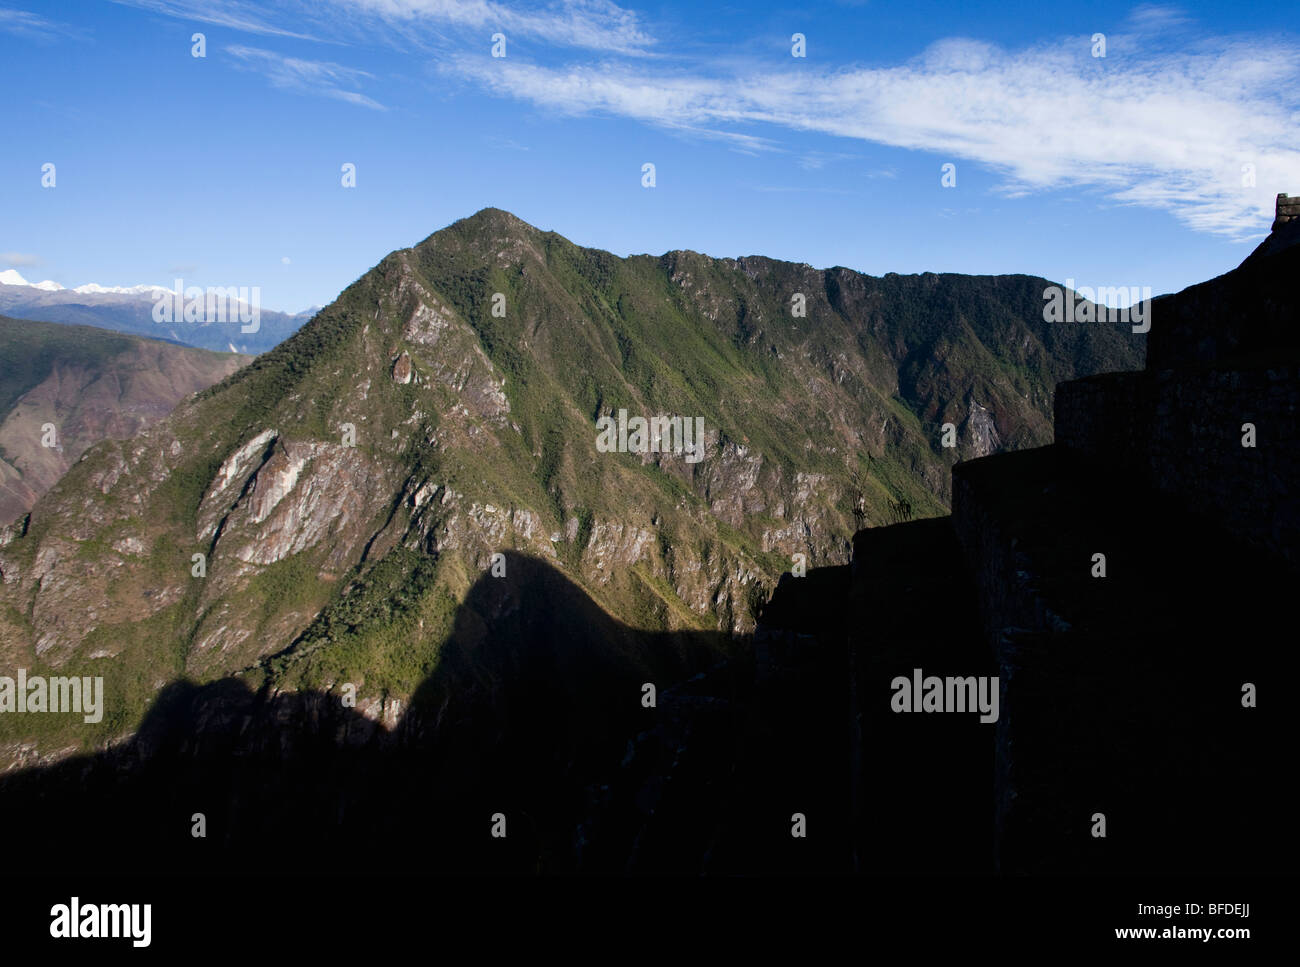 The silhouette of terraces and a mountain with a dramatic mountain range in the background. Stock Photo